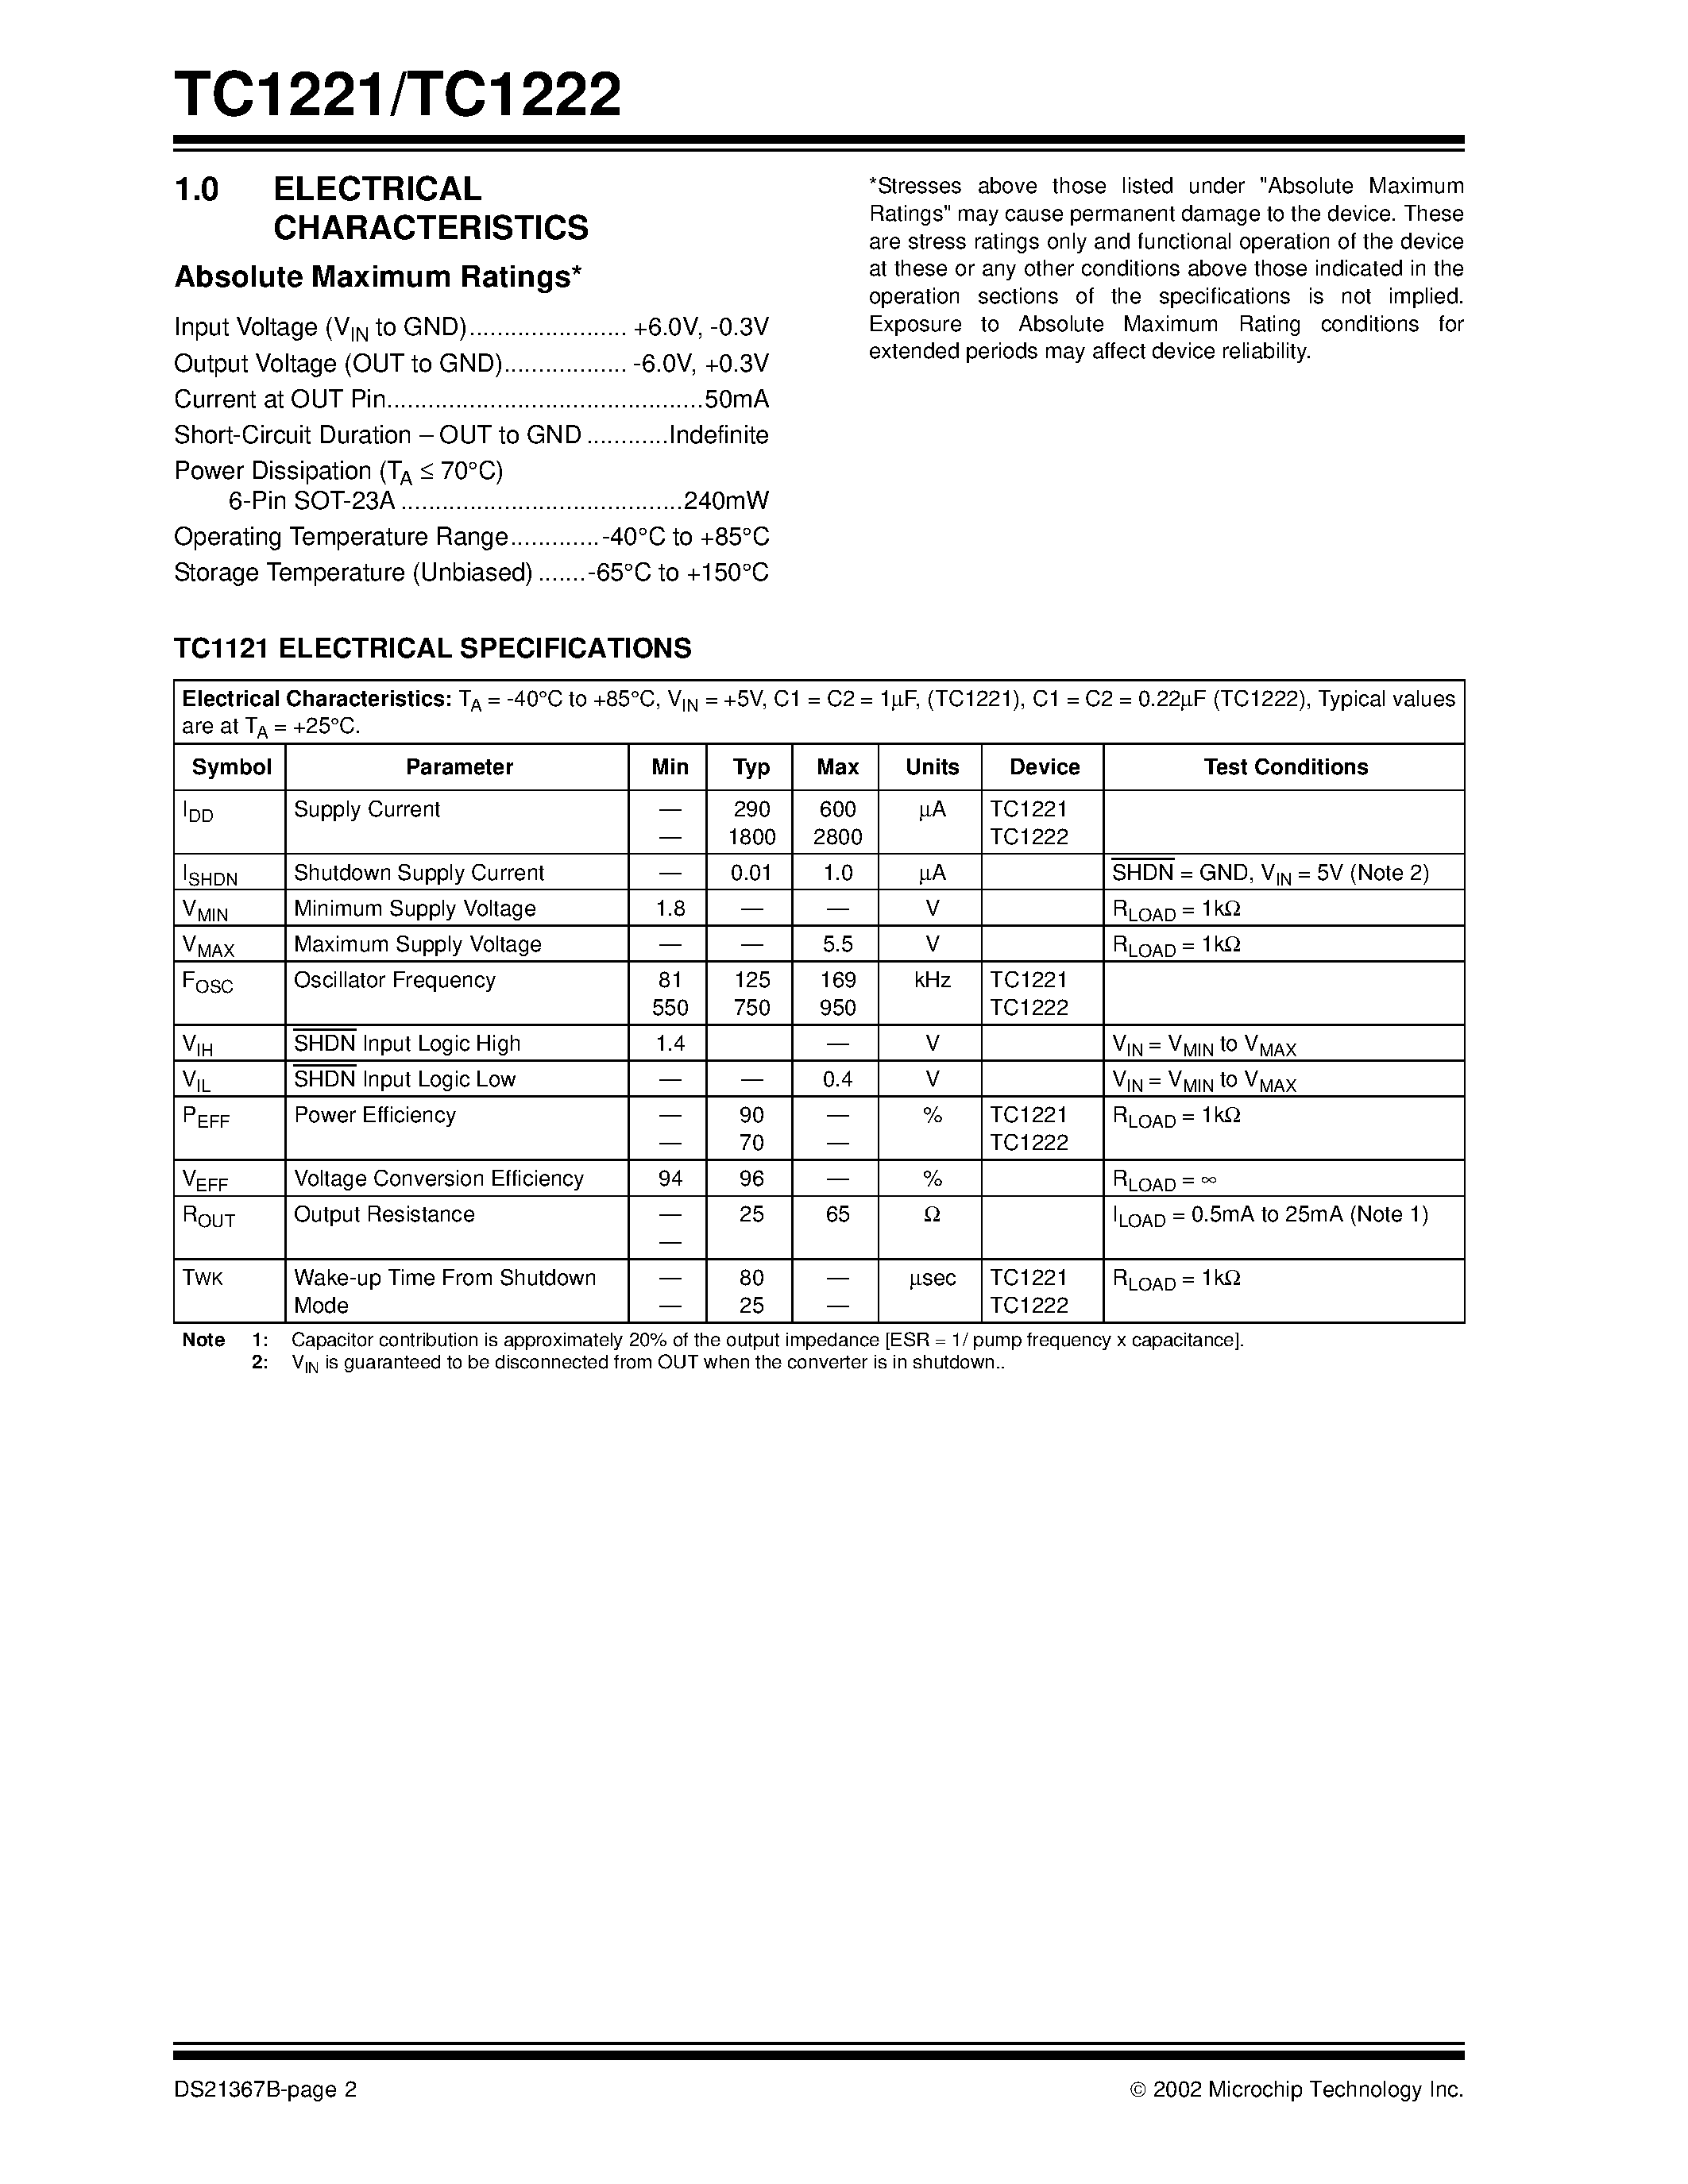 Datasheet TC1221 - (TC1221) High Frequency Switched Capacitor Voltage Converters with Shutdown in SOT Packages page 2